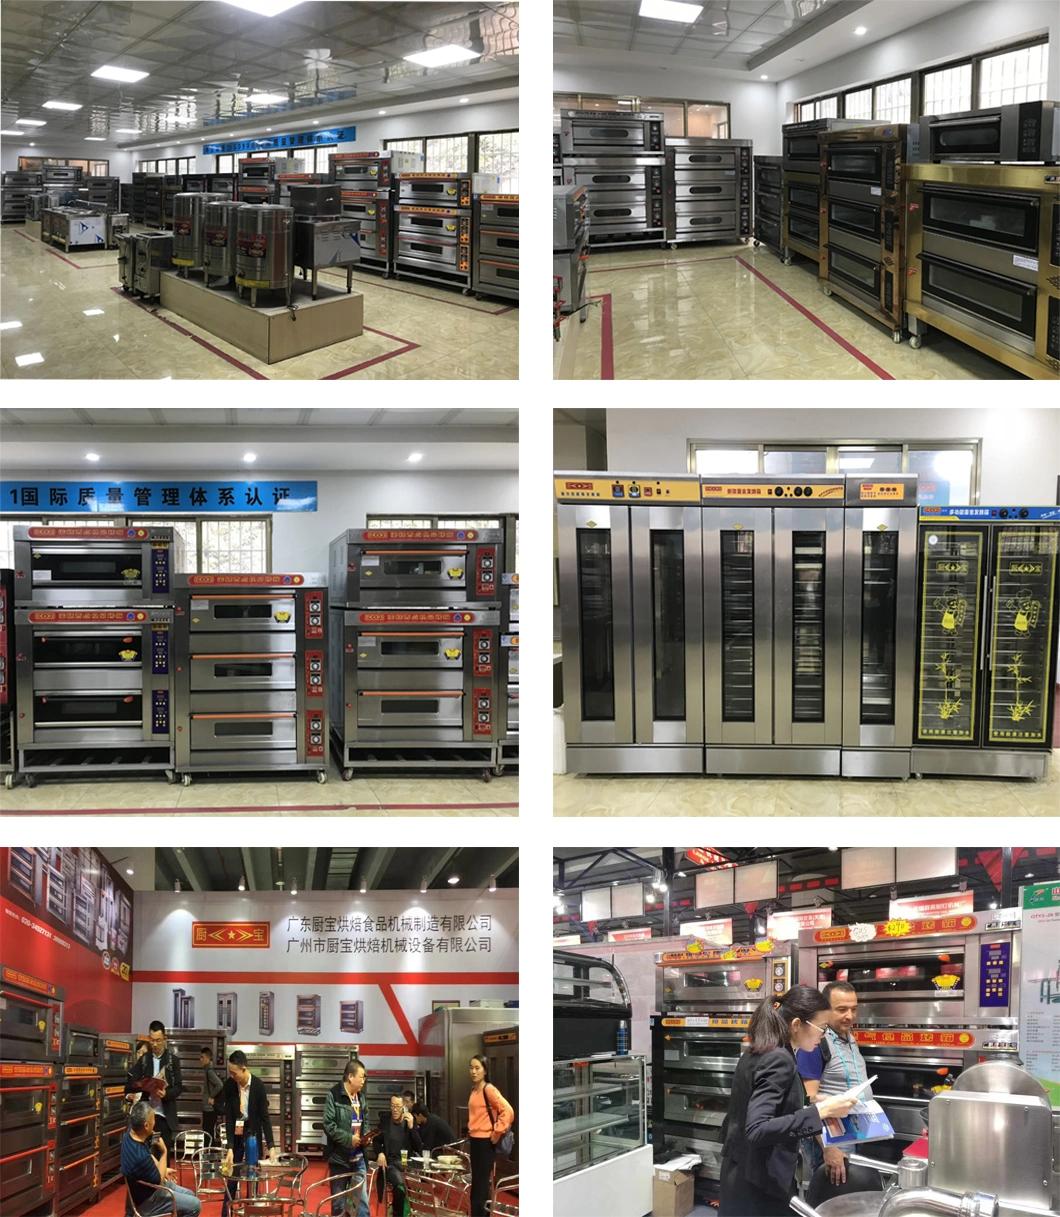 32 Trays Luxury Diesel Rotary Oven for Commercial Kitchen Baking Equipment Bakery Machinery Food Machine